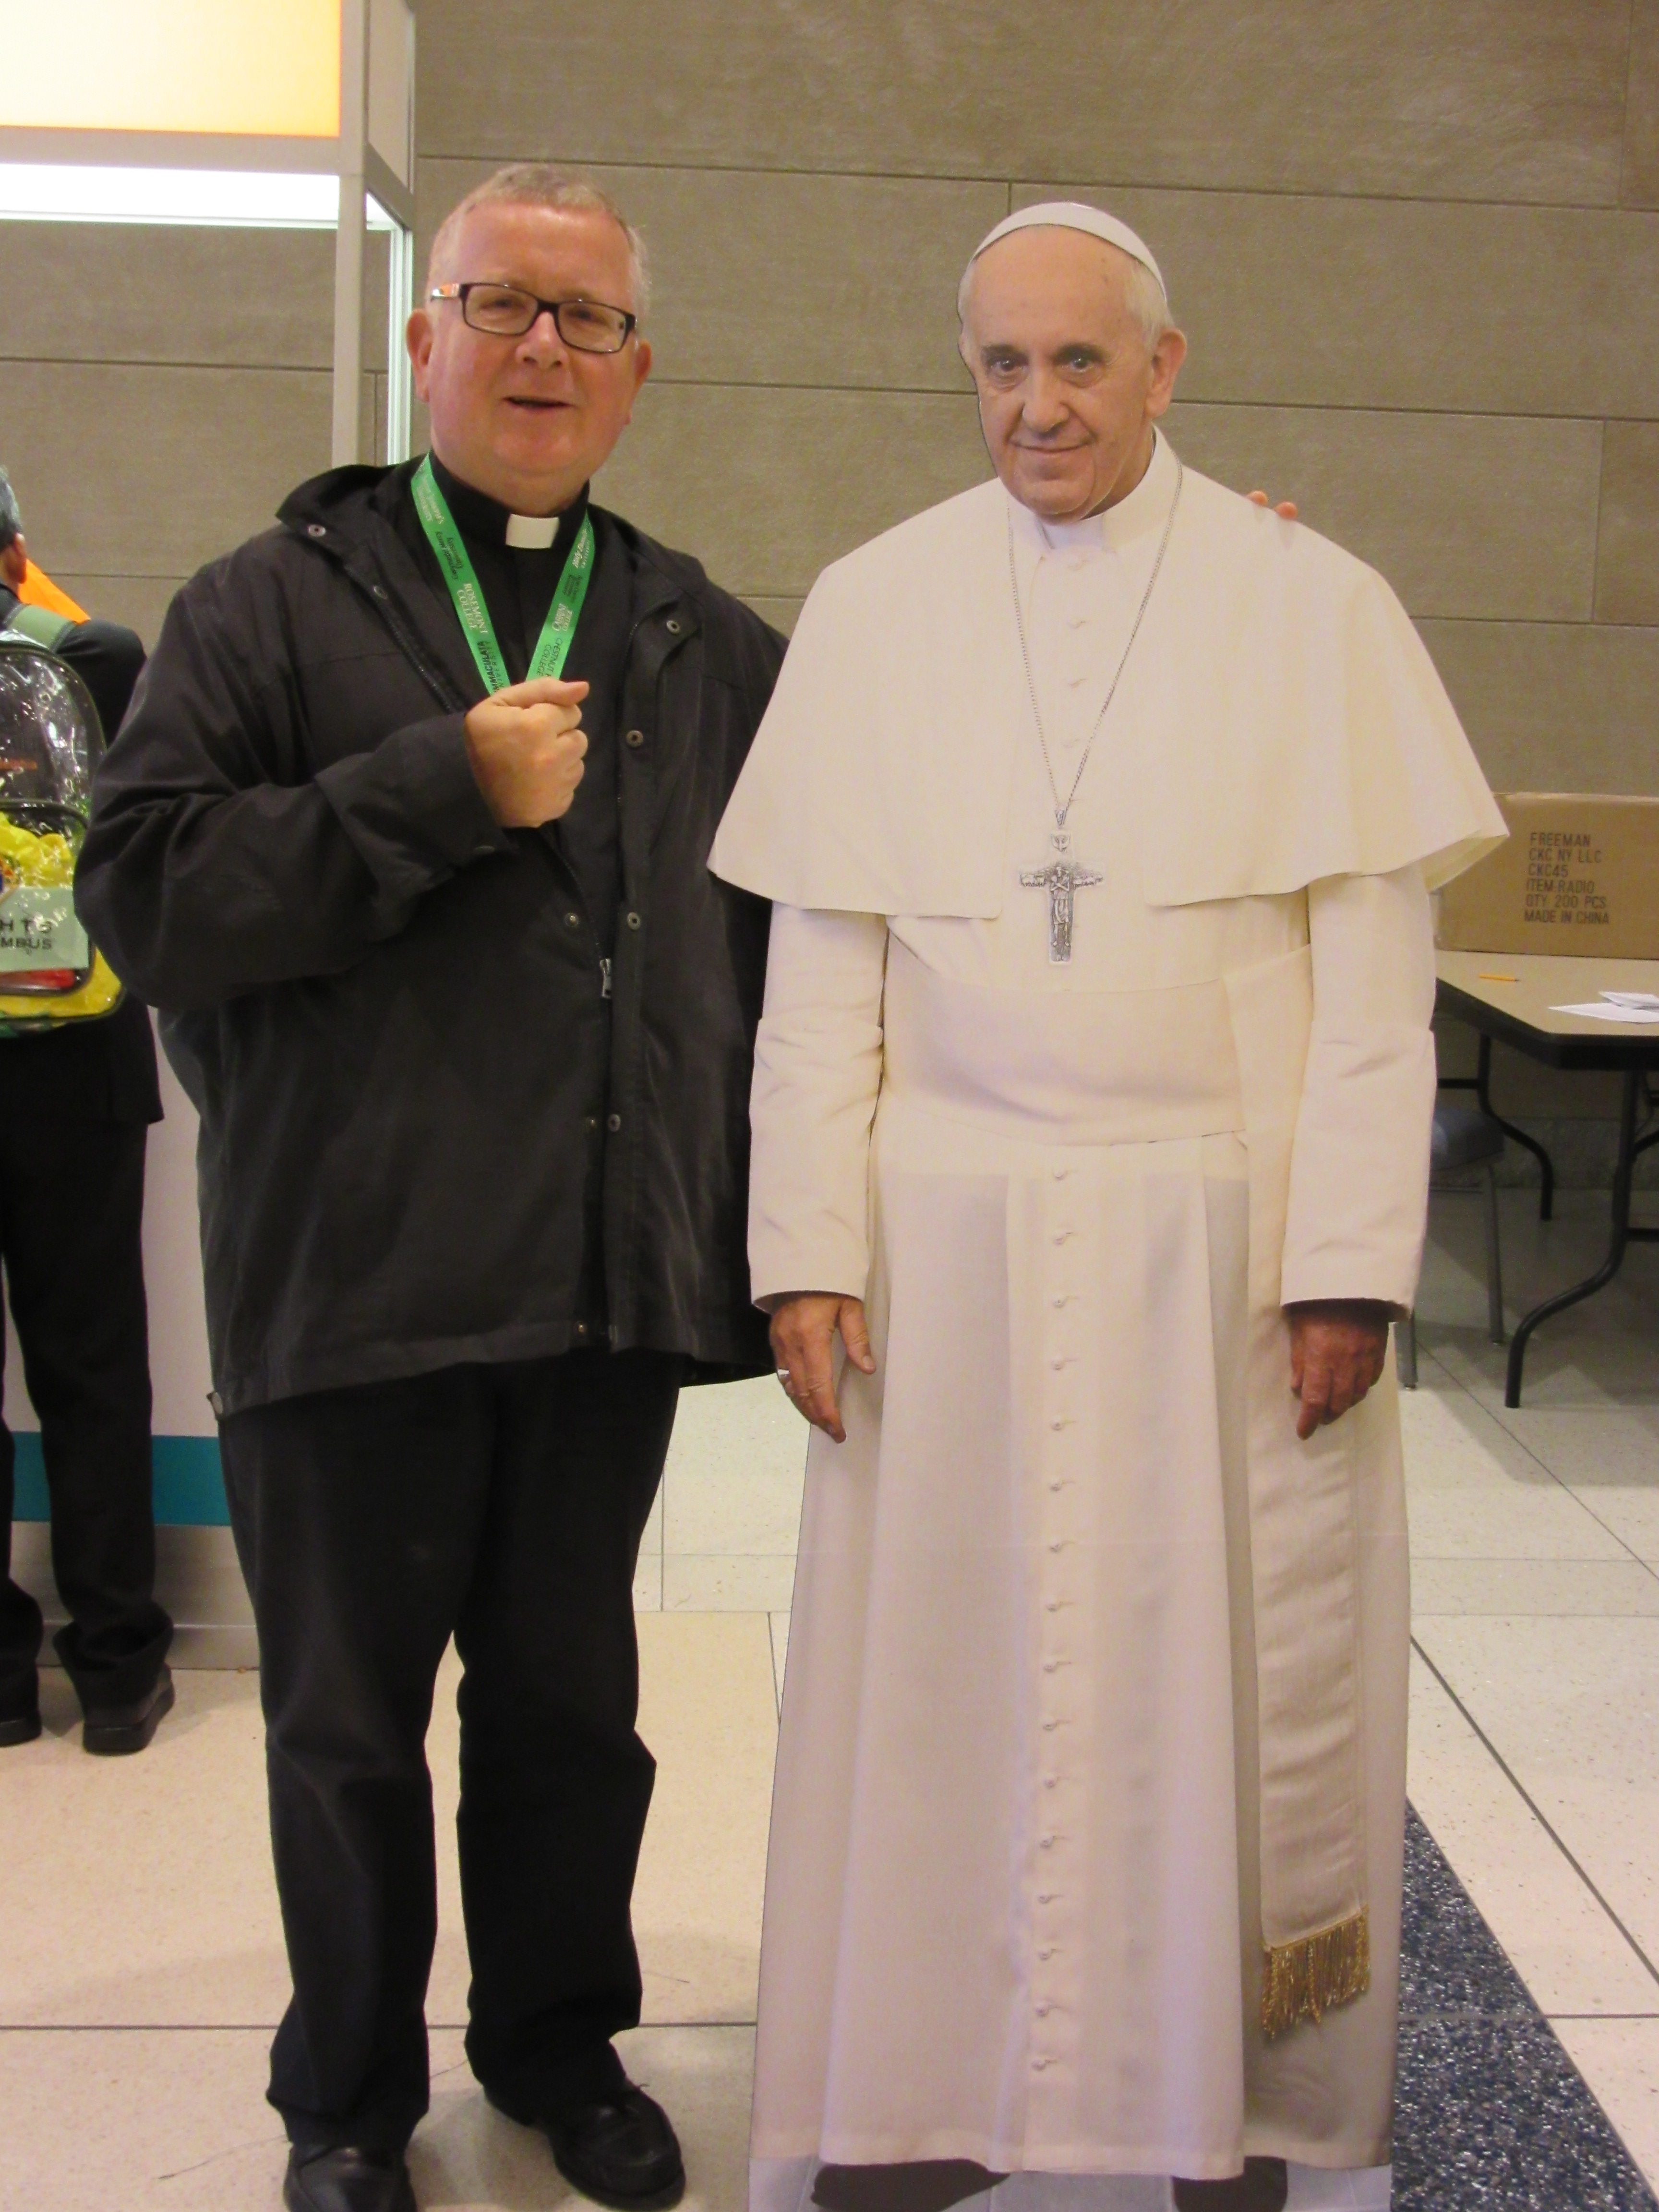 Fr Denis Metzinger with one of the photos of Pope Francis (Philadelphia 2015)